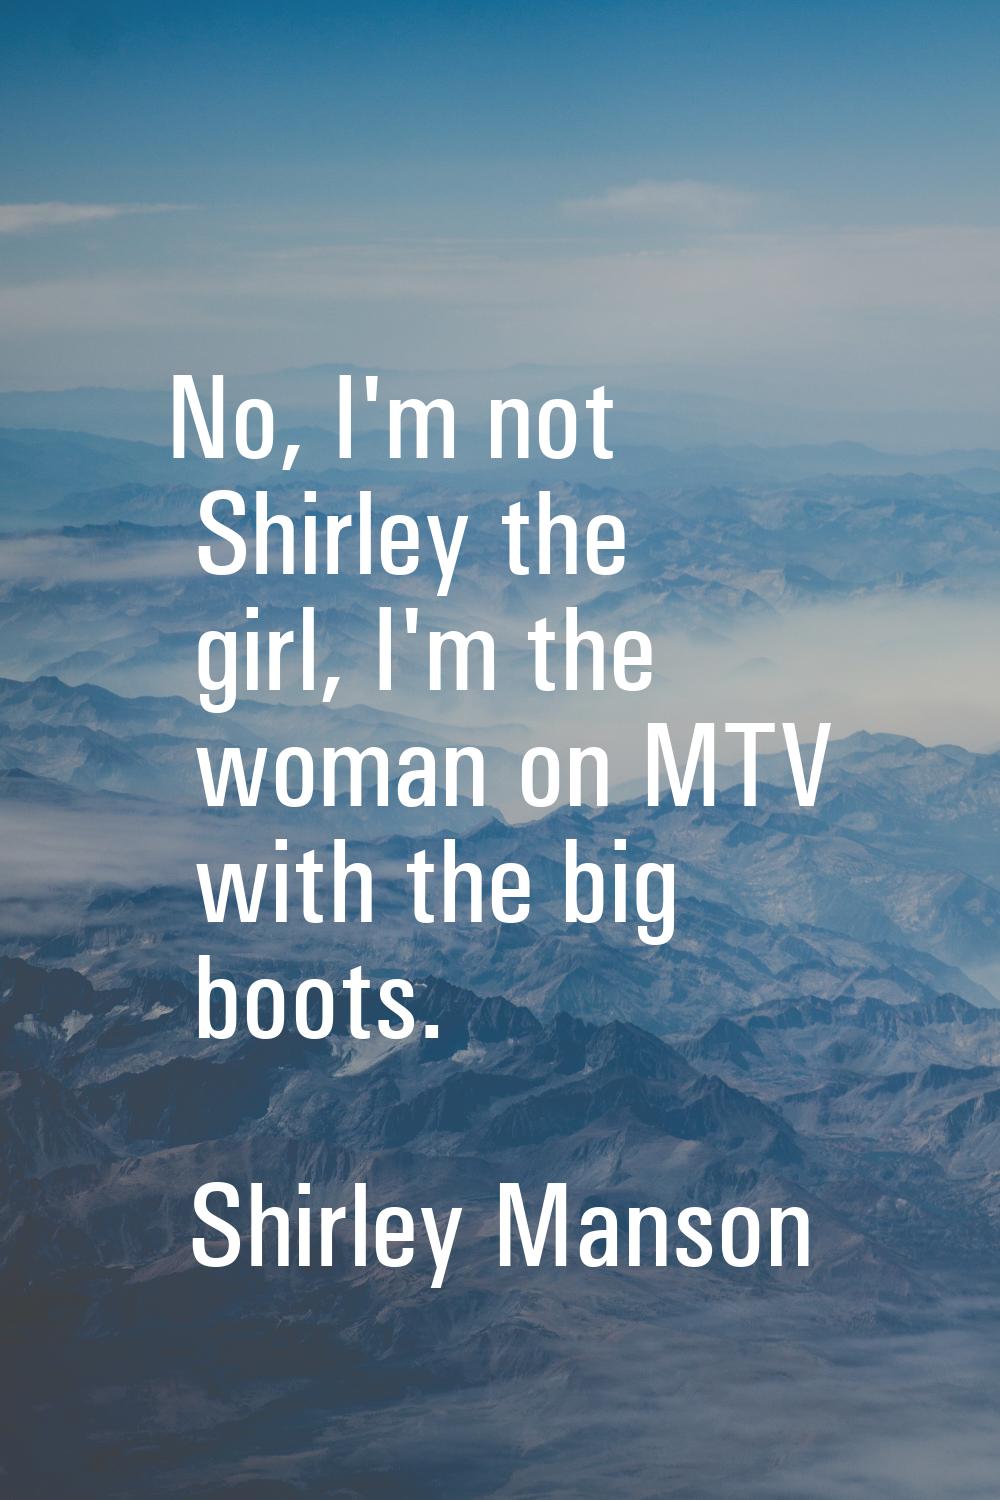 No, I'm not Shirley the girl, I'm the woman on MTV with the big boots.